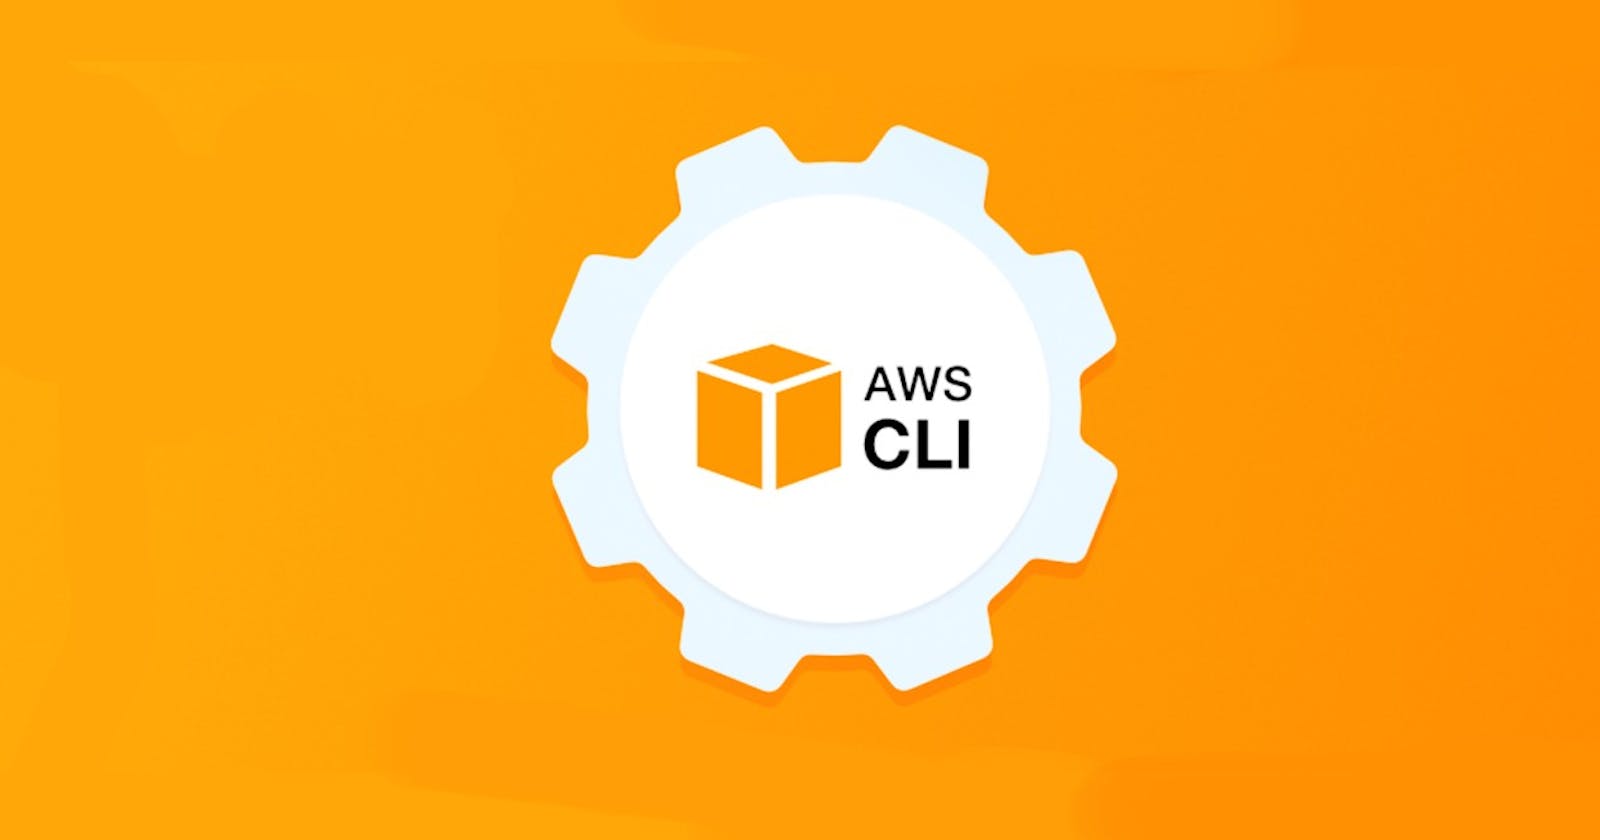 How to Create an EC2 Instance using AWS CLI